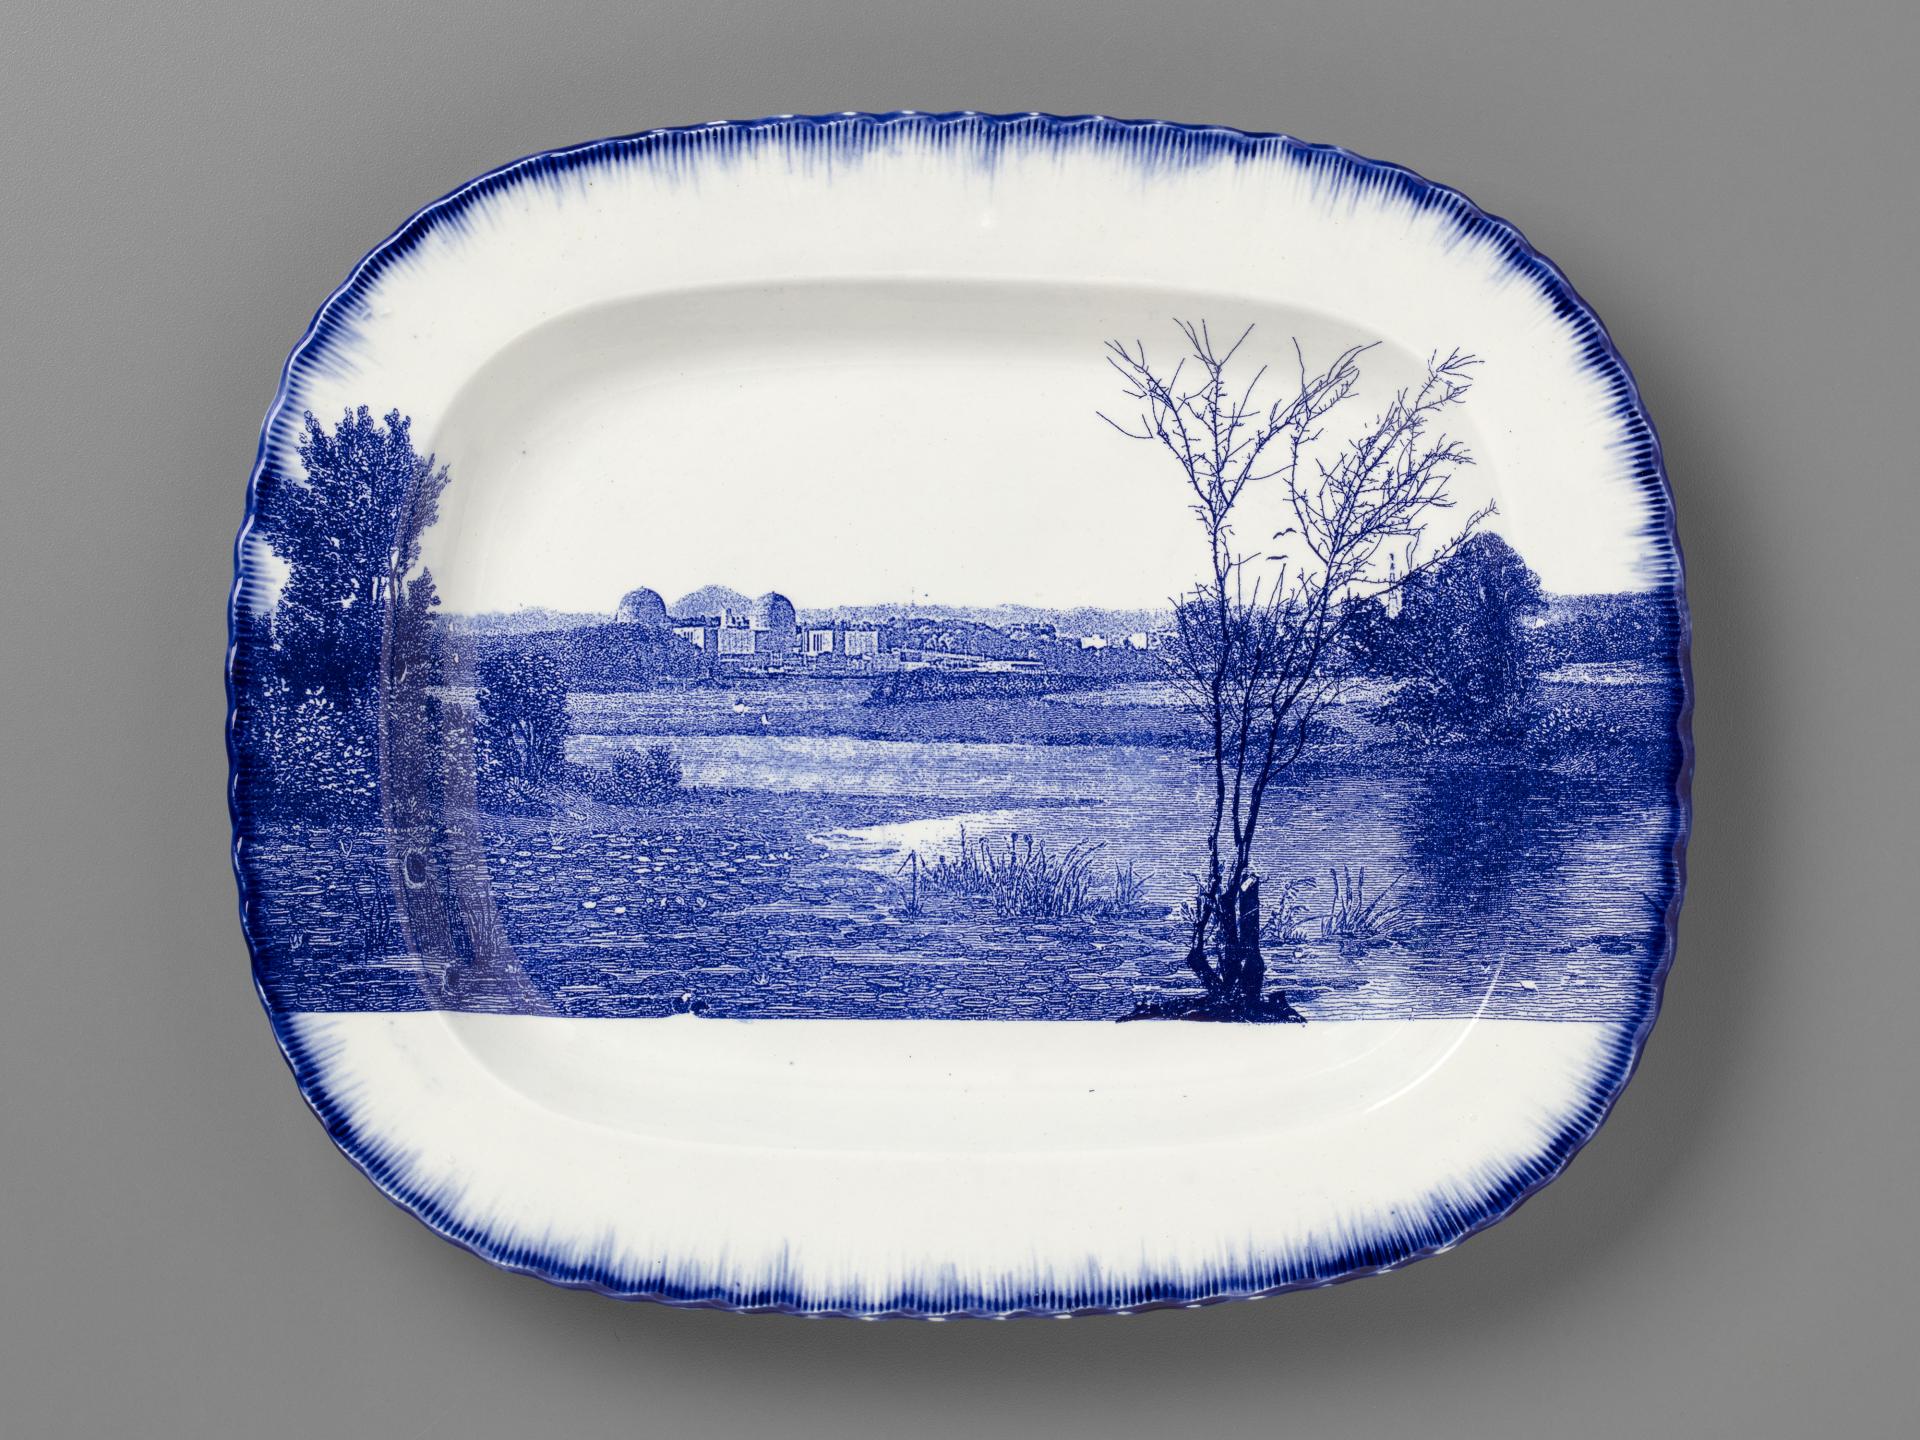 blue and white transferware platter with the Indian Point power station